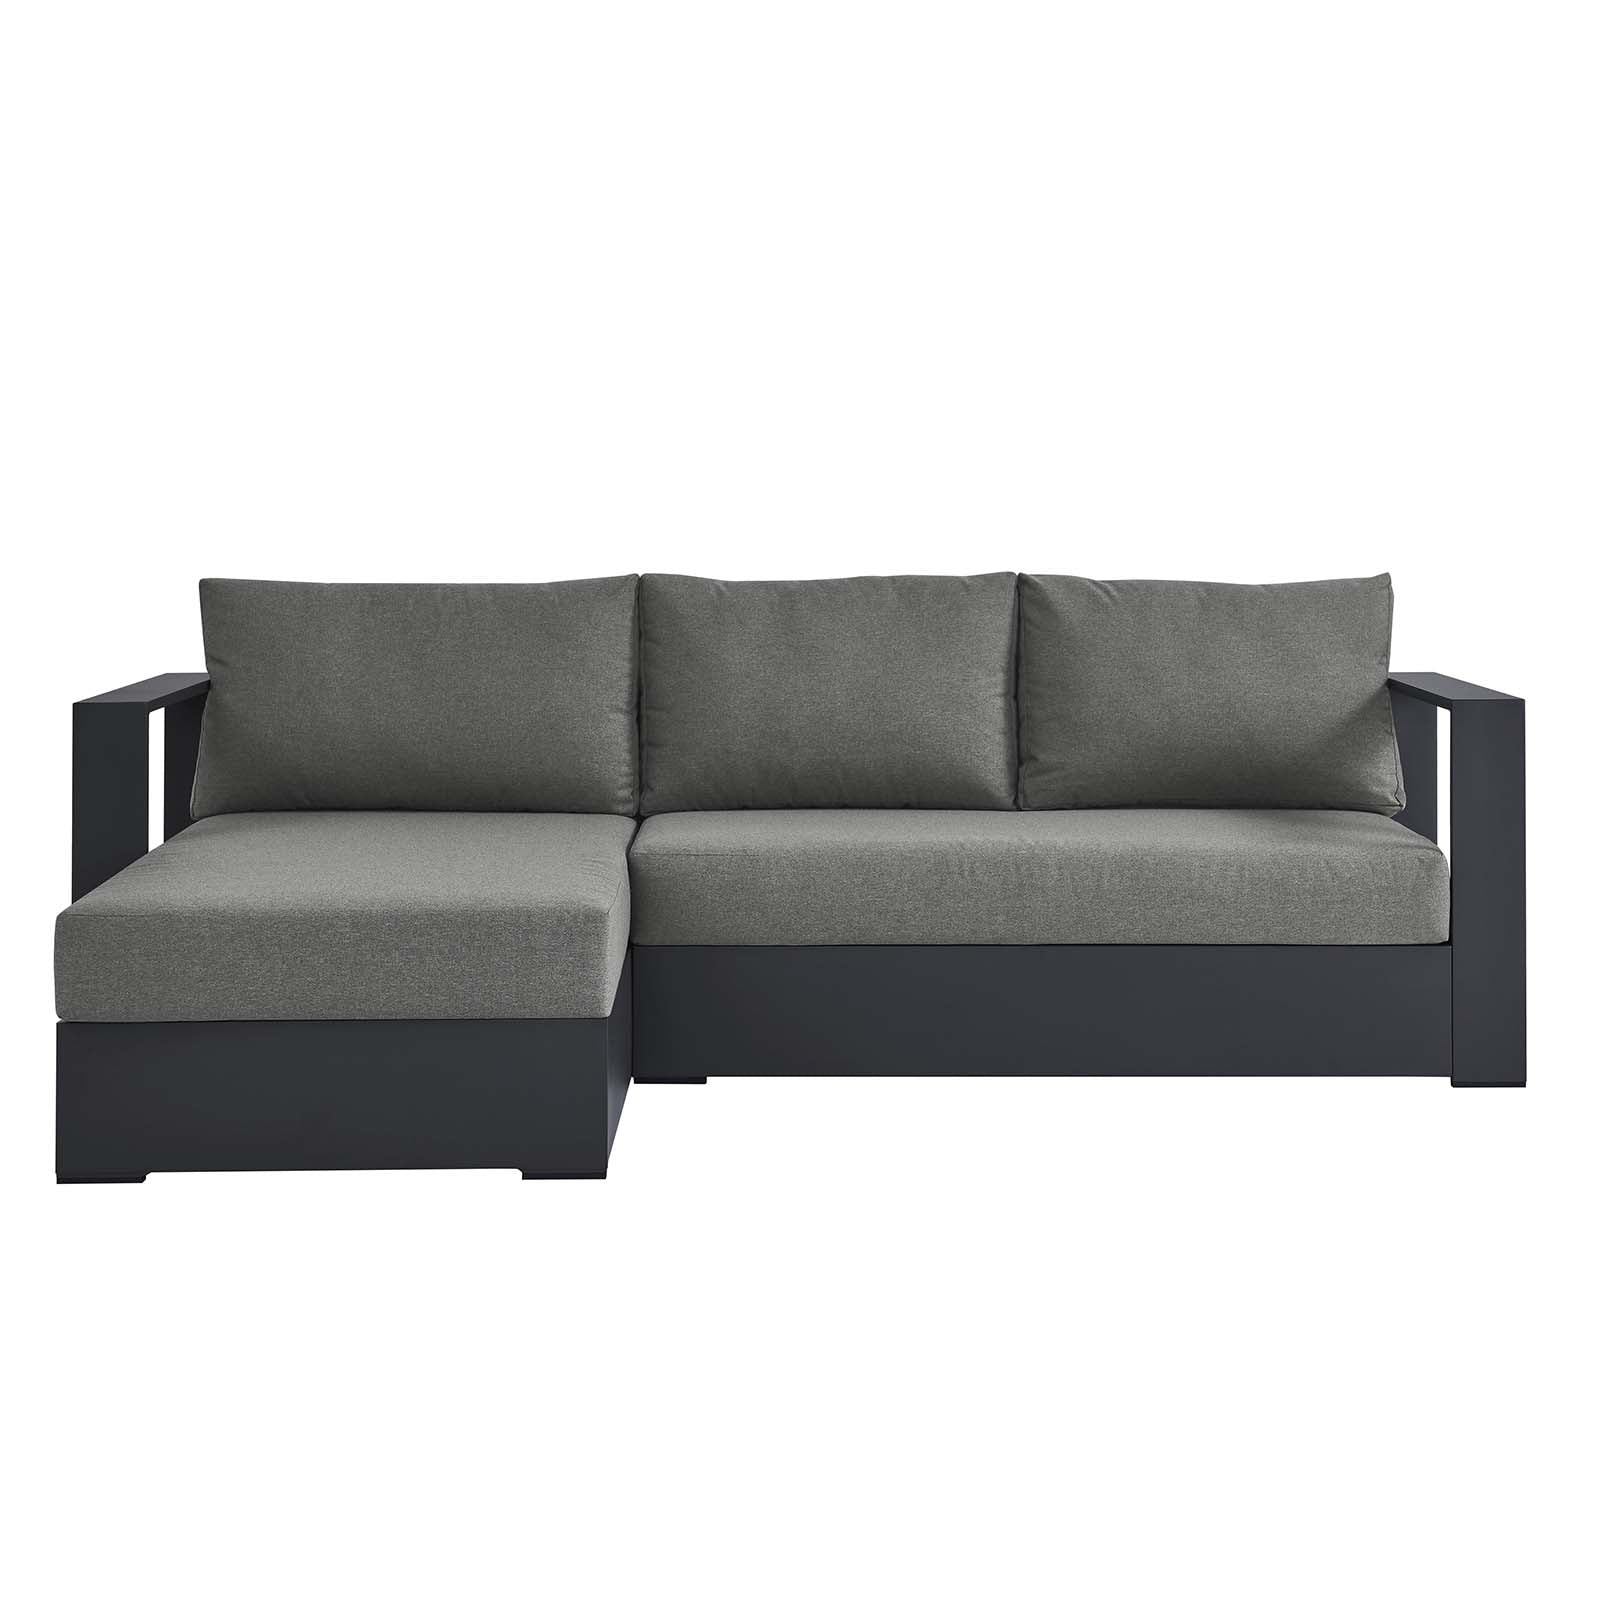 Tahoe Outdoor Patio Powder-Coated Aluminum 2-Piece Left-Facing Chaise Sectional Sofa Set